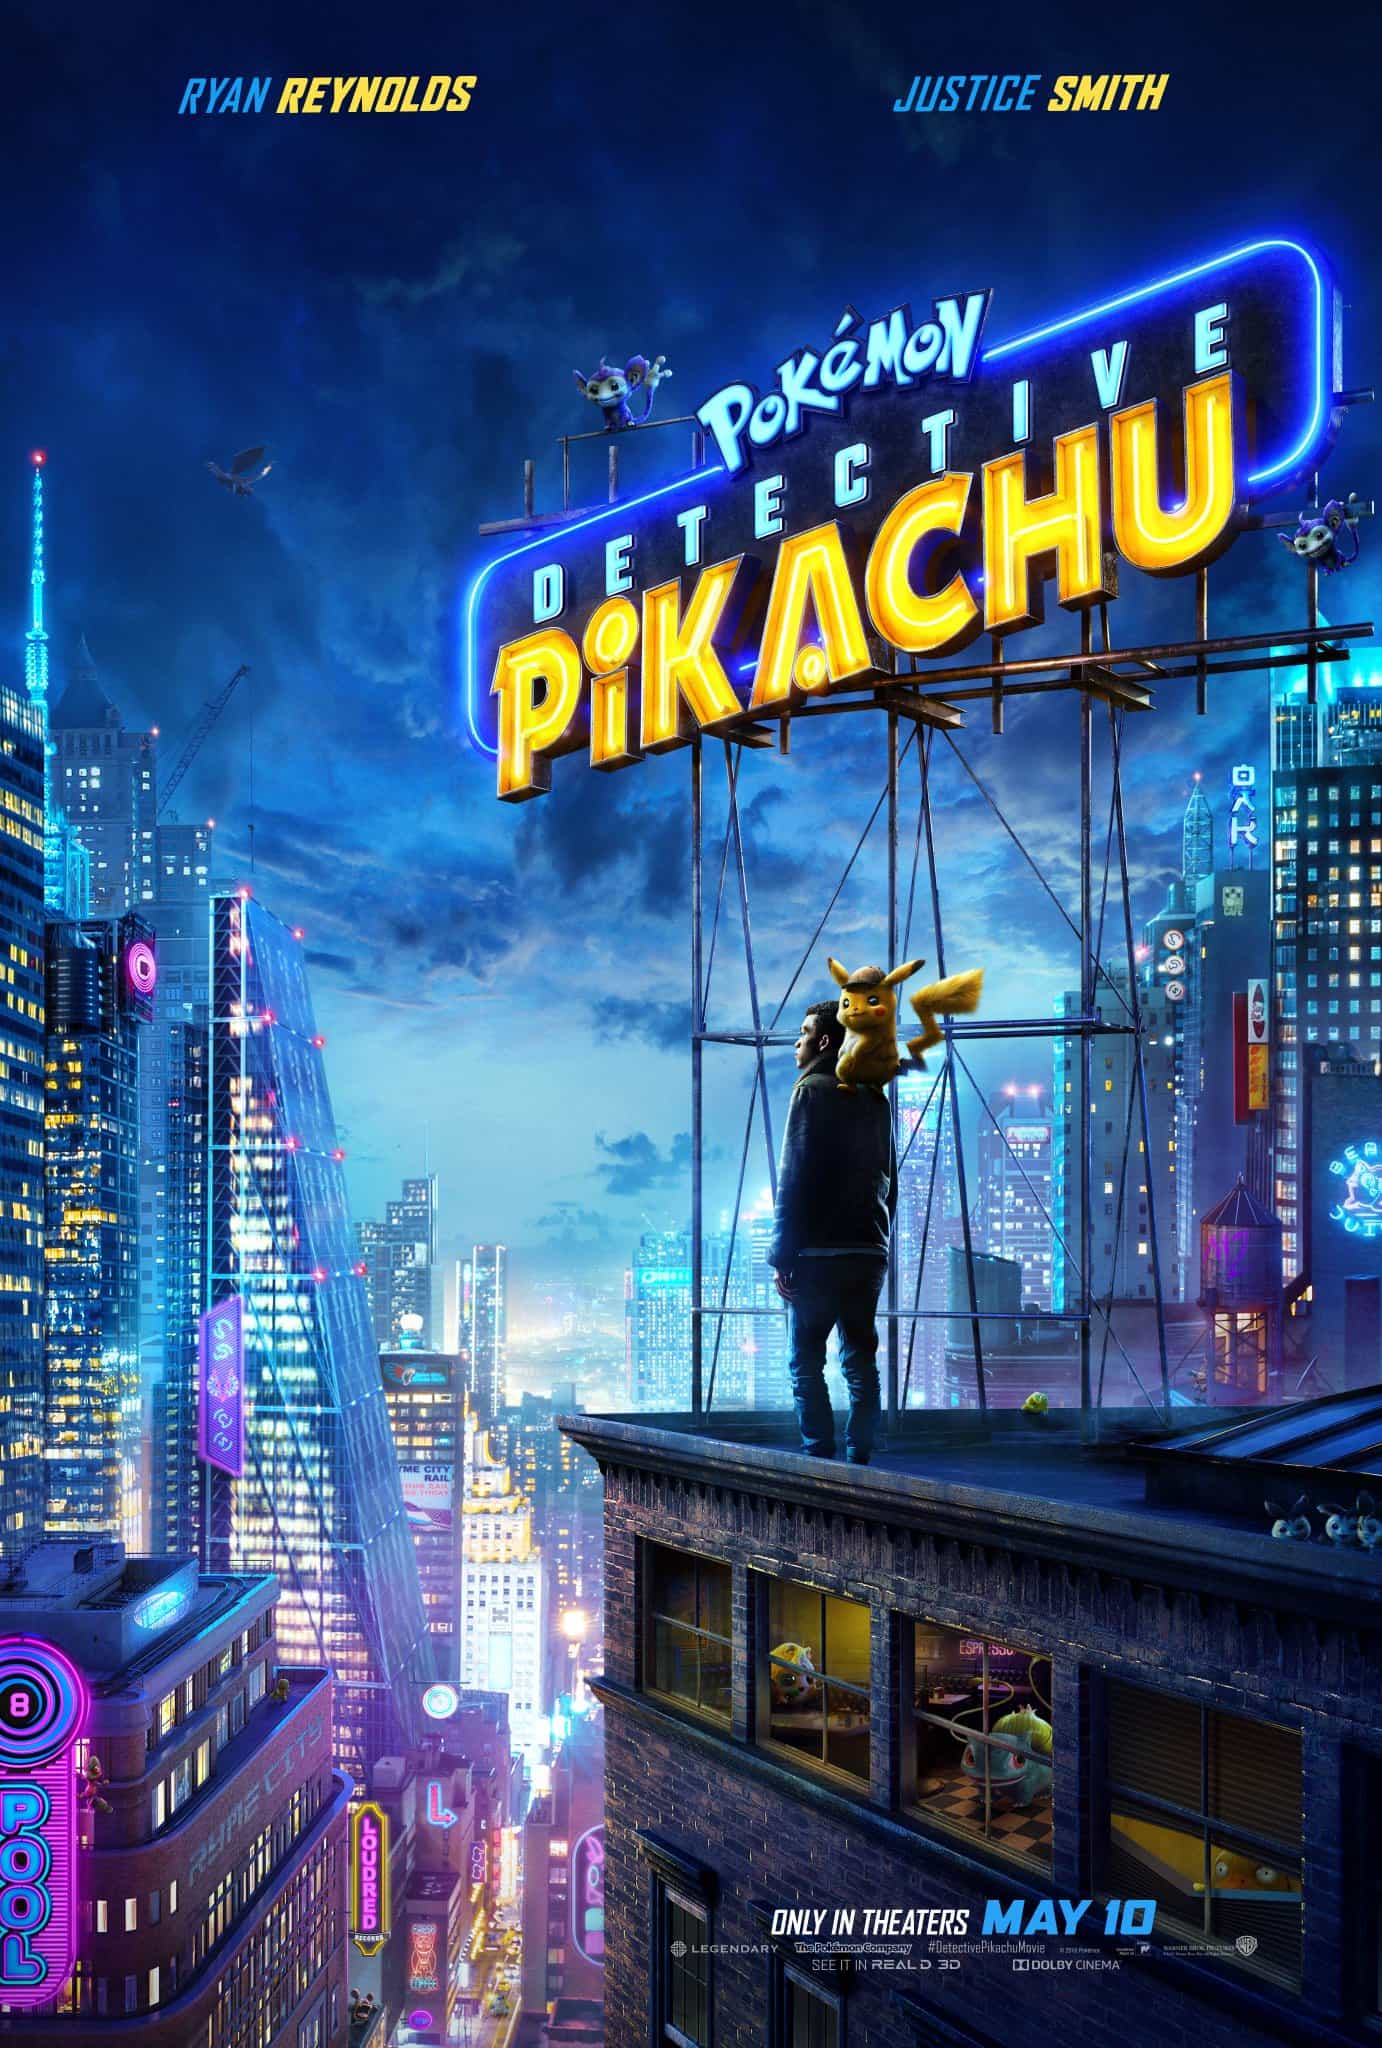 New film releases at the UK box office Friday, 10th May 2019 - Pokemon: Detective Pikachu, High Life, Destination Wedding, Amazing Grace and The Hustle